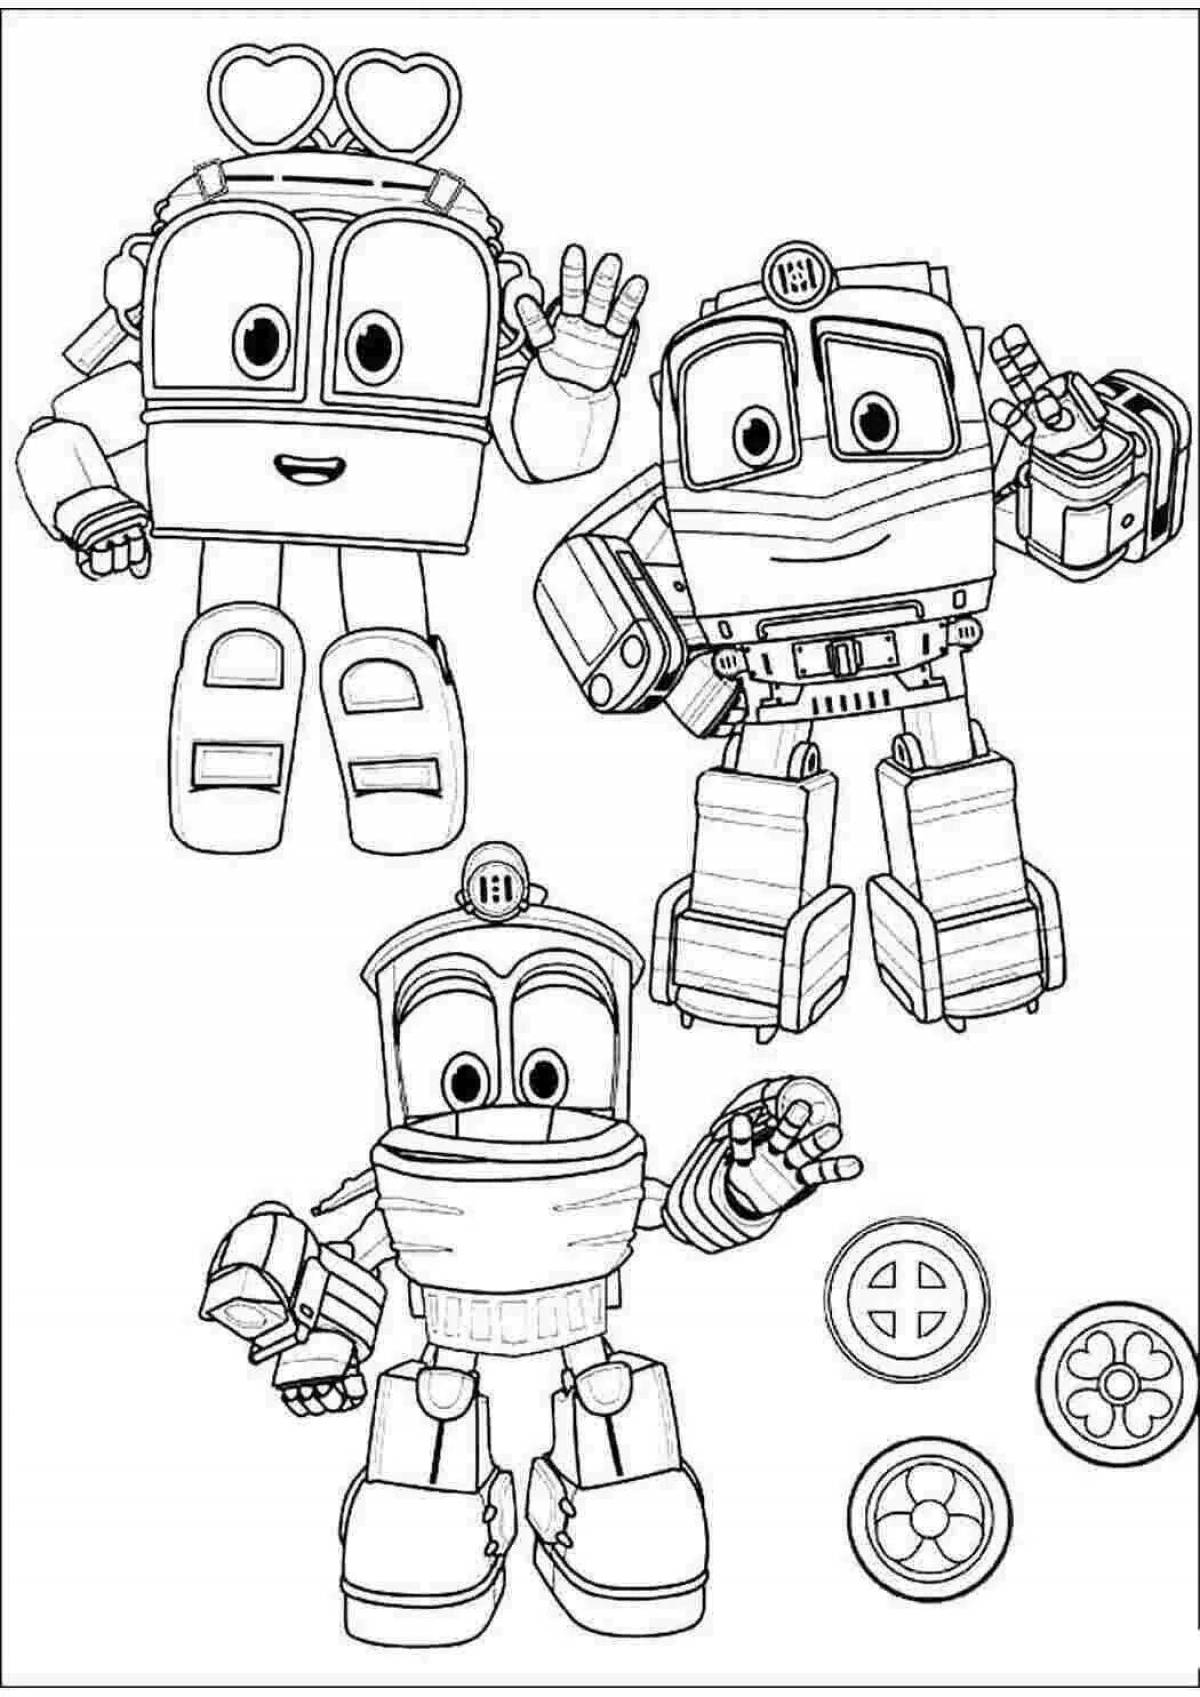 Colorful printing robot coloring page